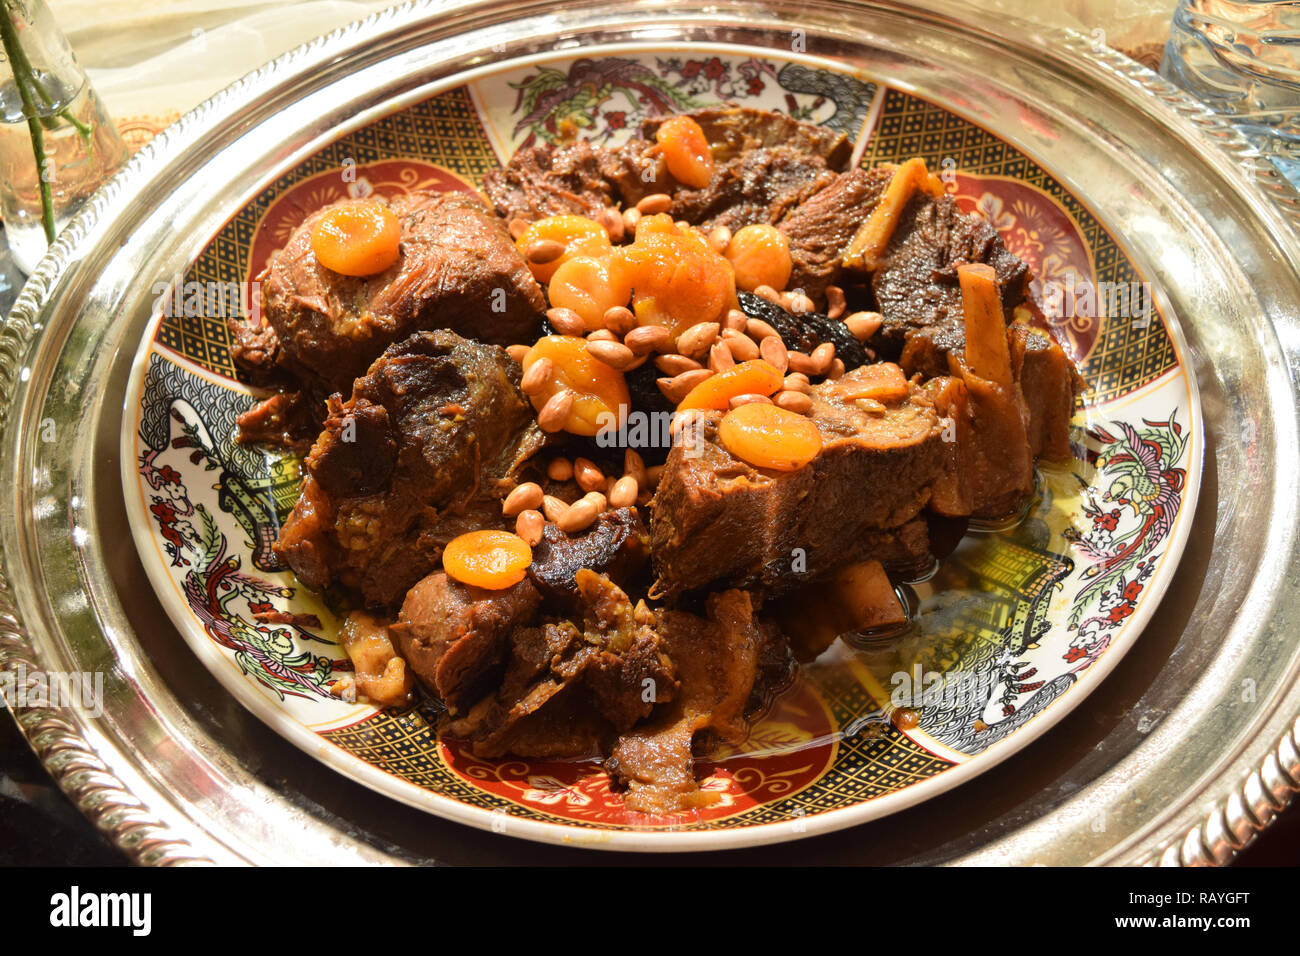 Moroccan dish with meat, plums and sesame seeds close up Stock Photo